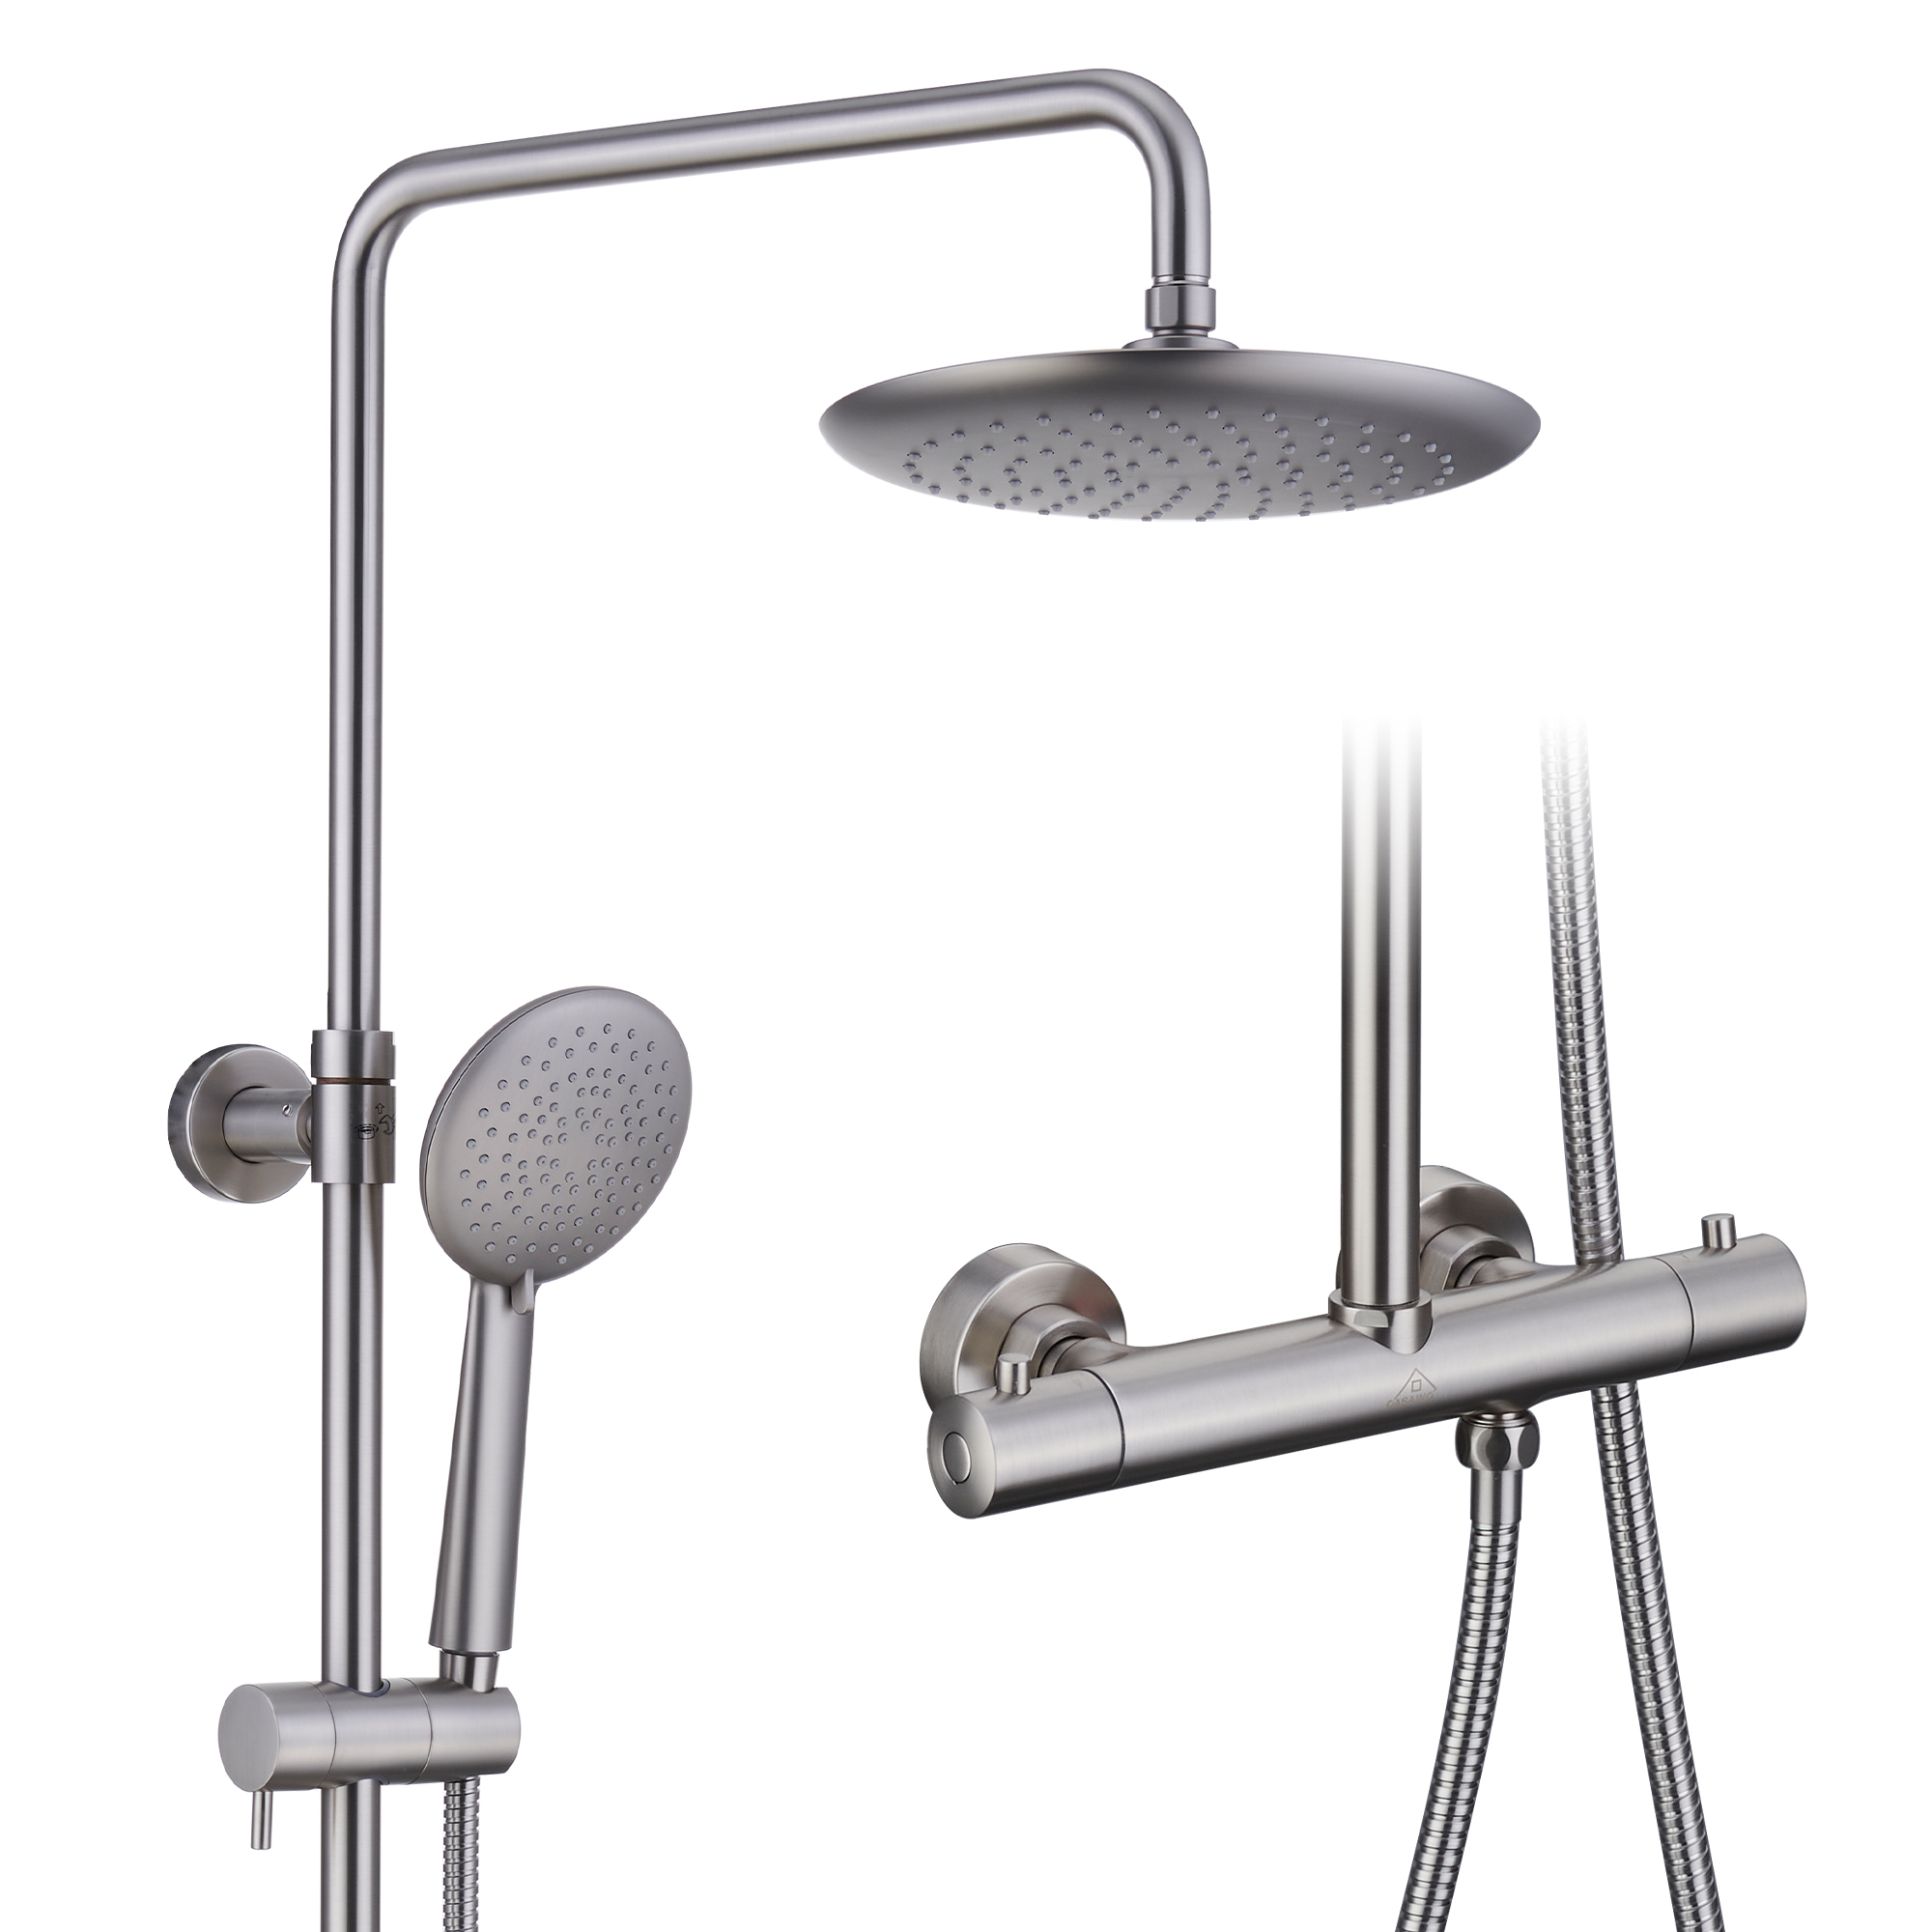 9.5" Thermostatic Rain Shower Faucet with Slide Bar and Hand Shower